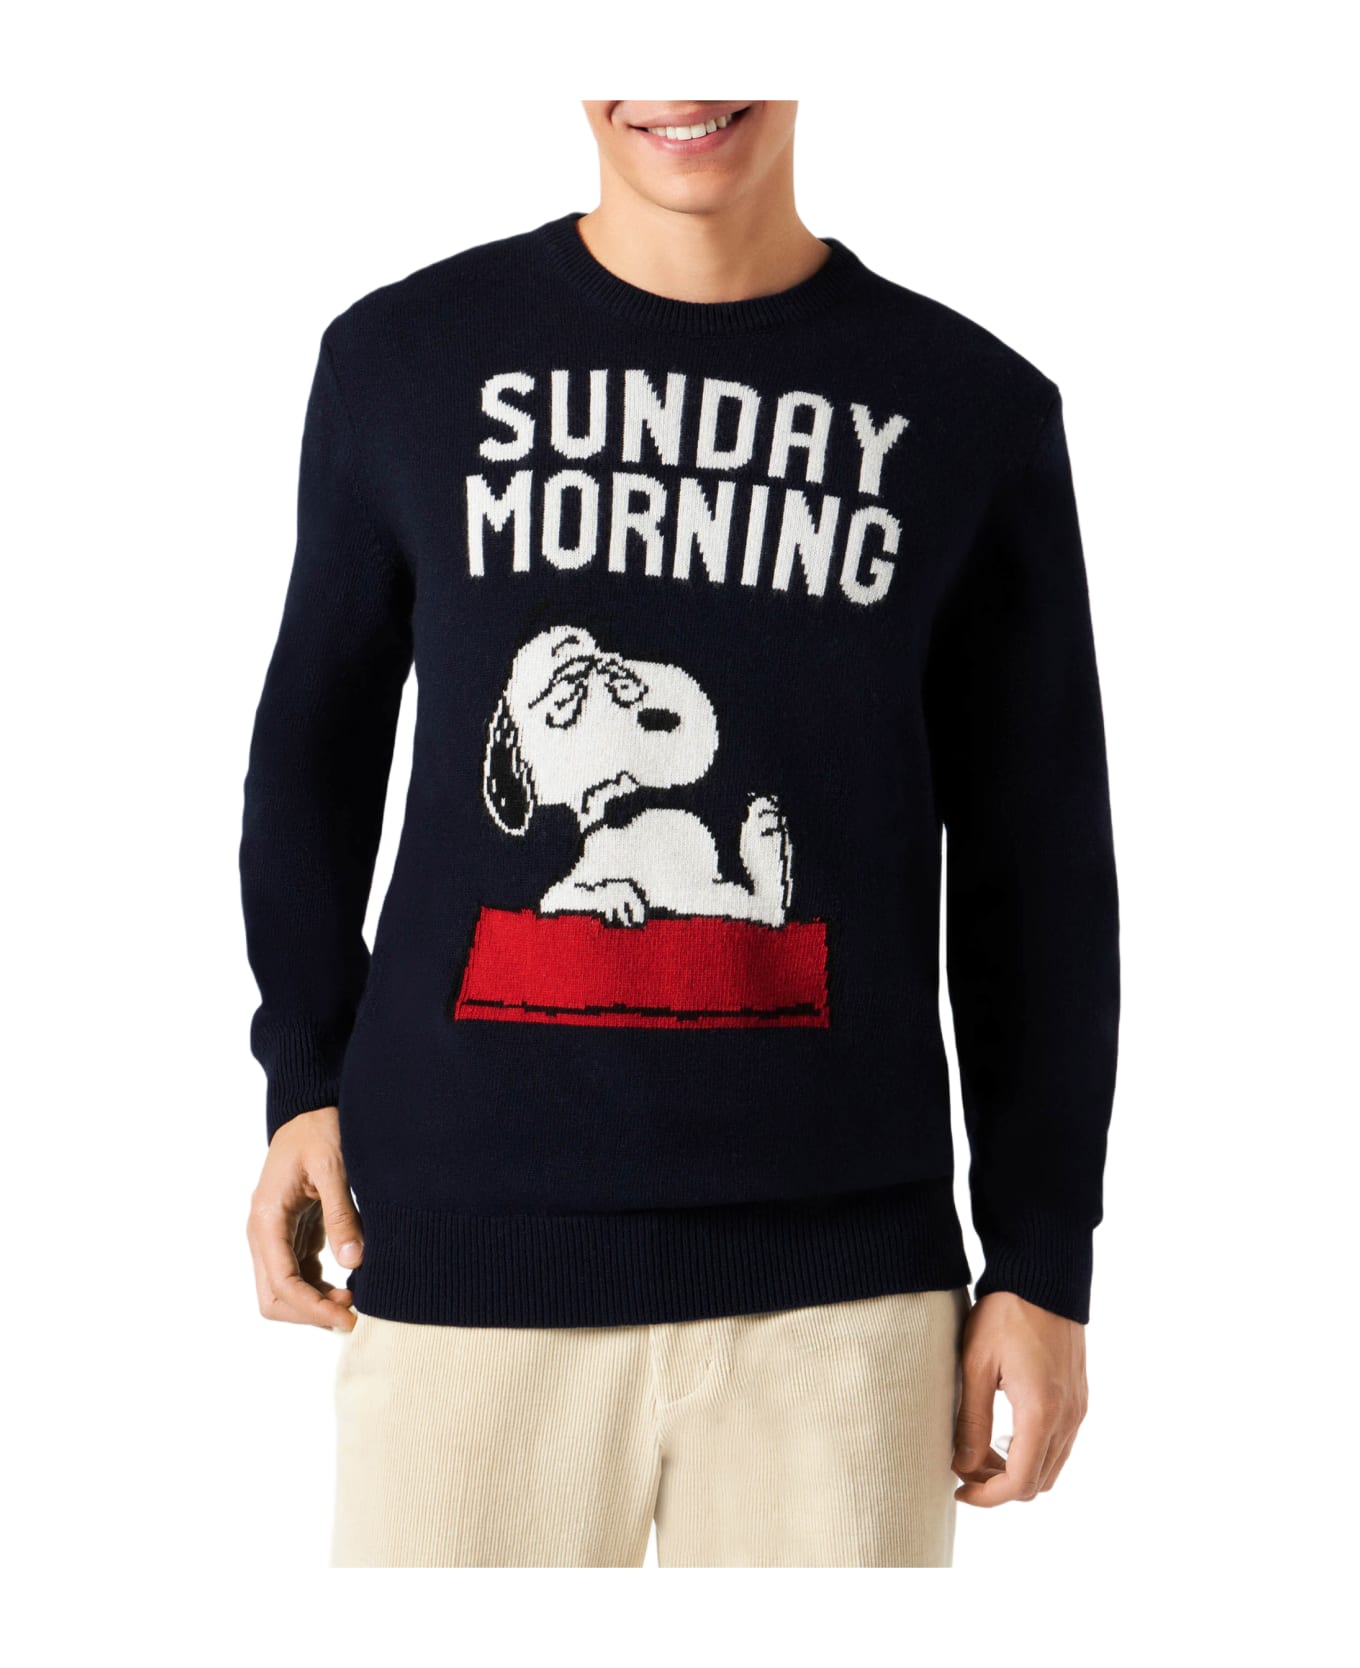 MC2 Saint Barth Man Sweater With Snoopy Sunday Morning Print | Snoopy - Peanuts Special Edition - BLUE